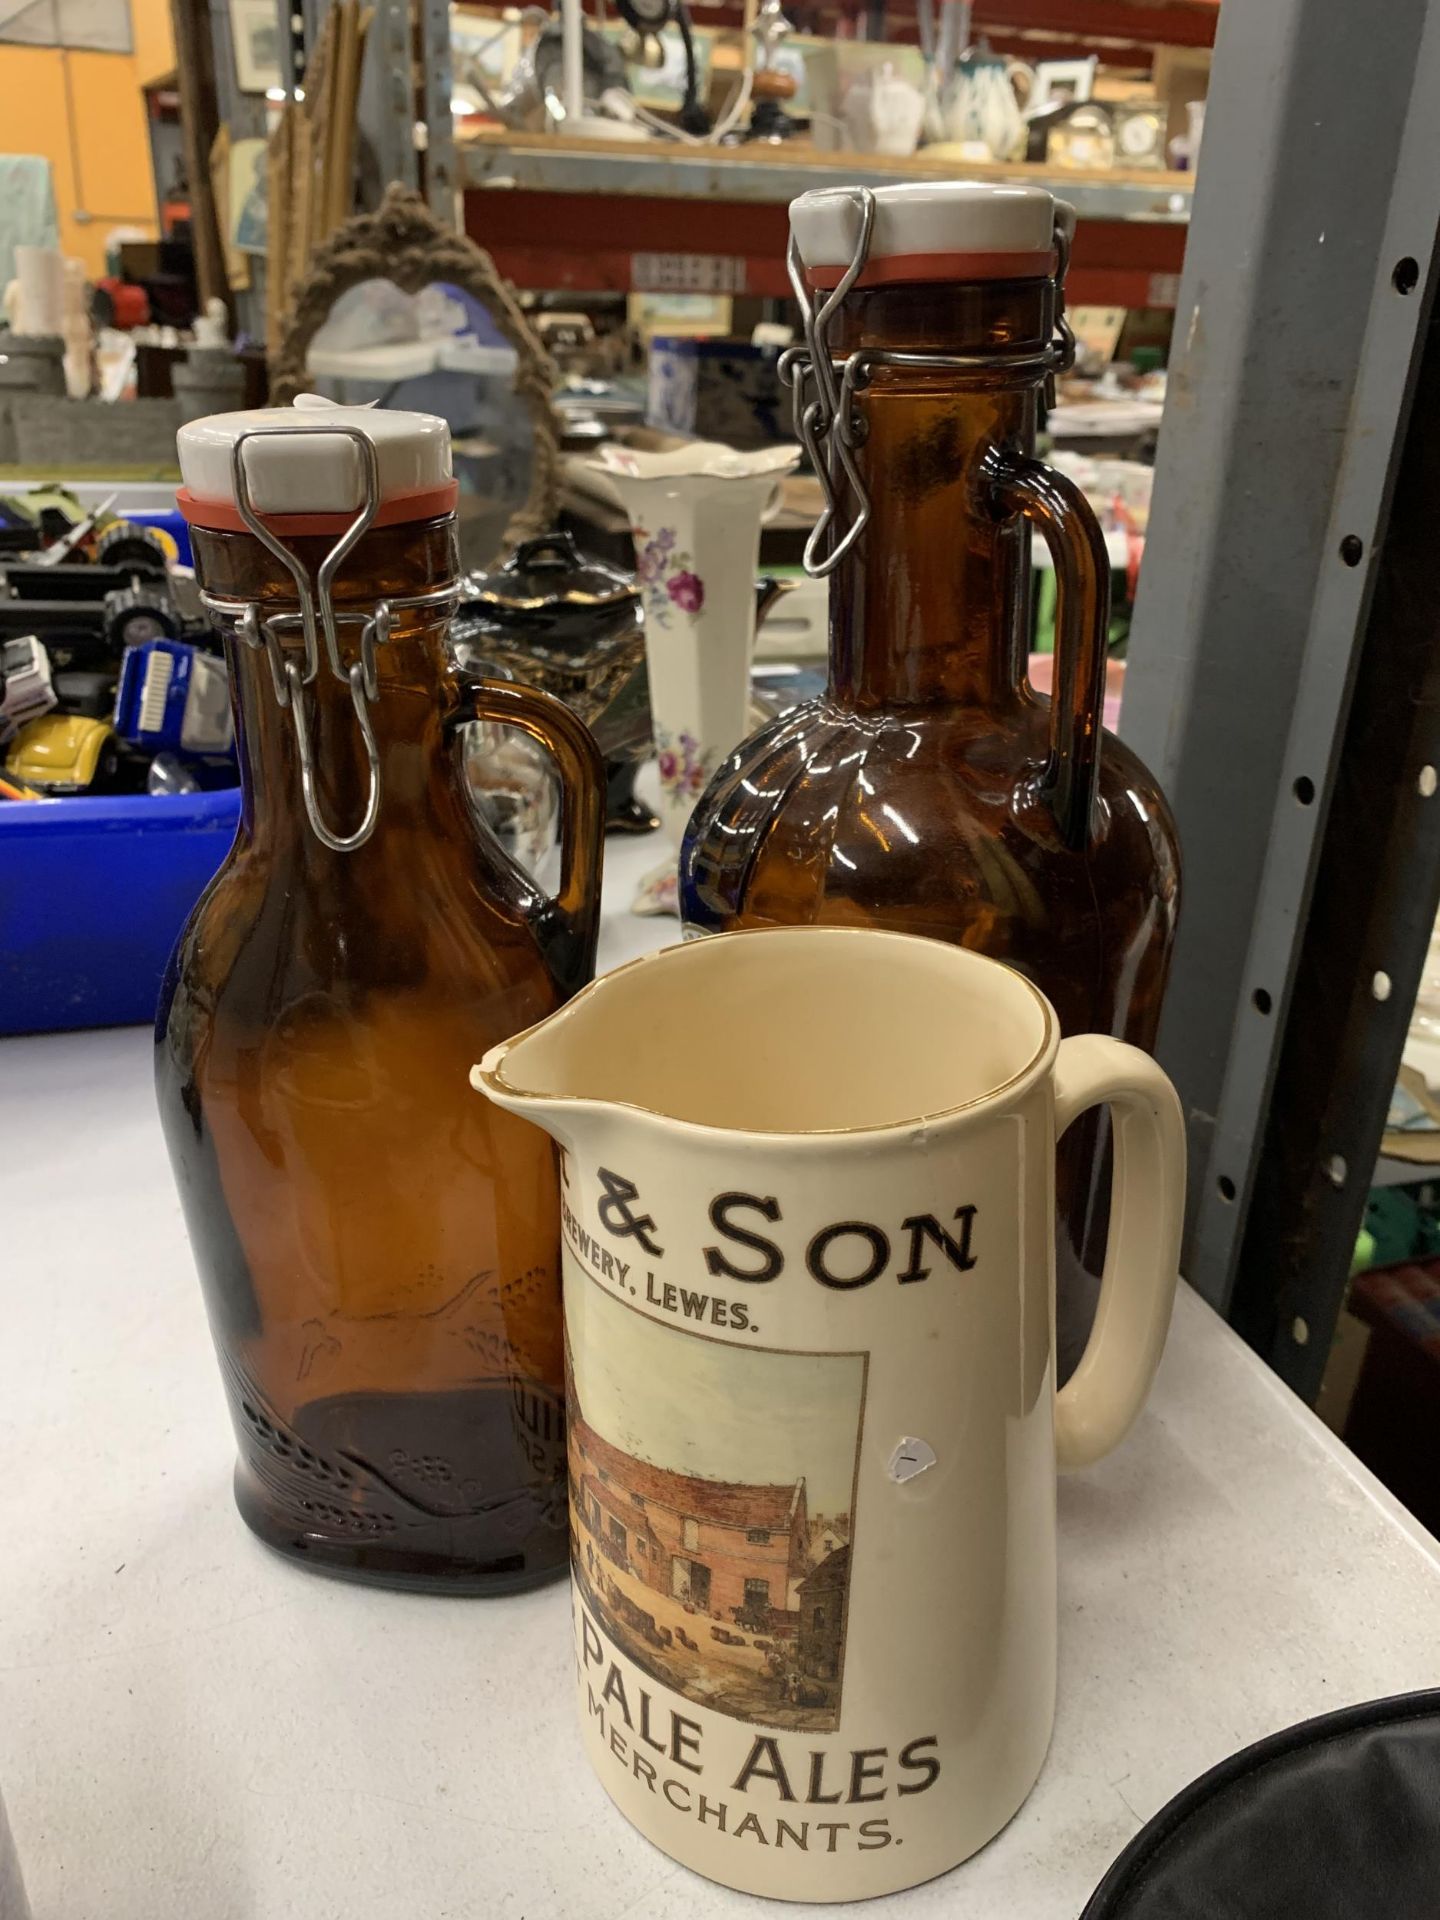 A HARVEY AND SONS BREWERY WATER JUG, COTTERIDGE WINES BOTTLE PLUS ONE OTHER